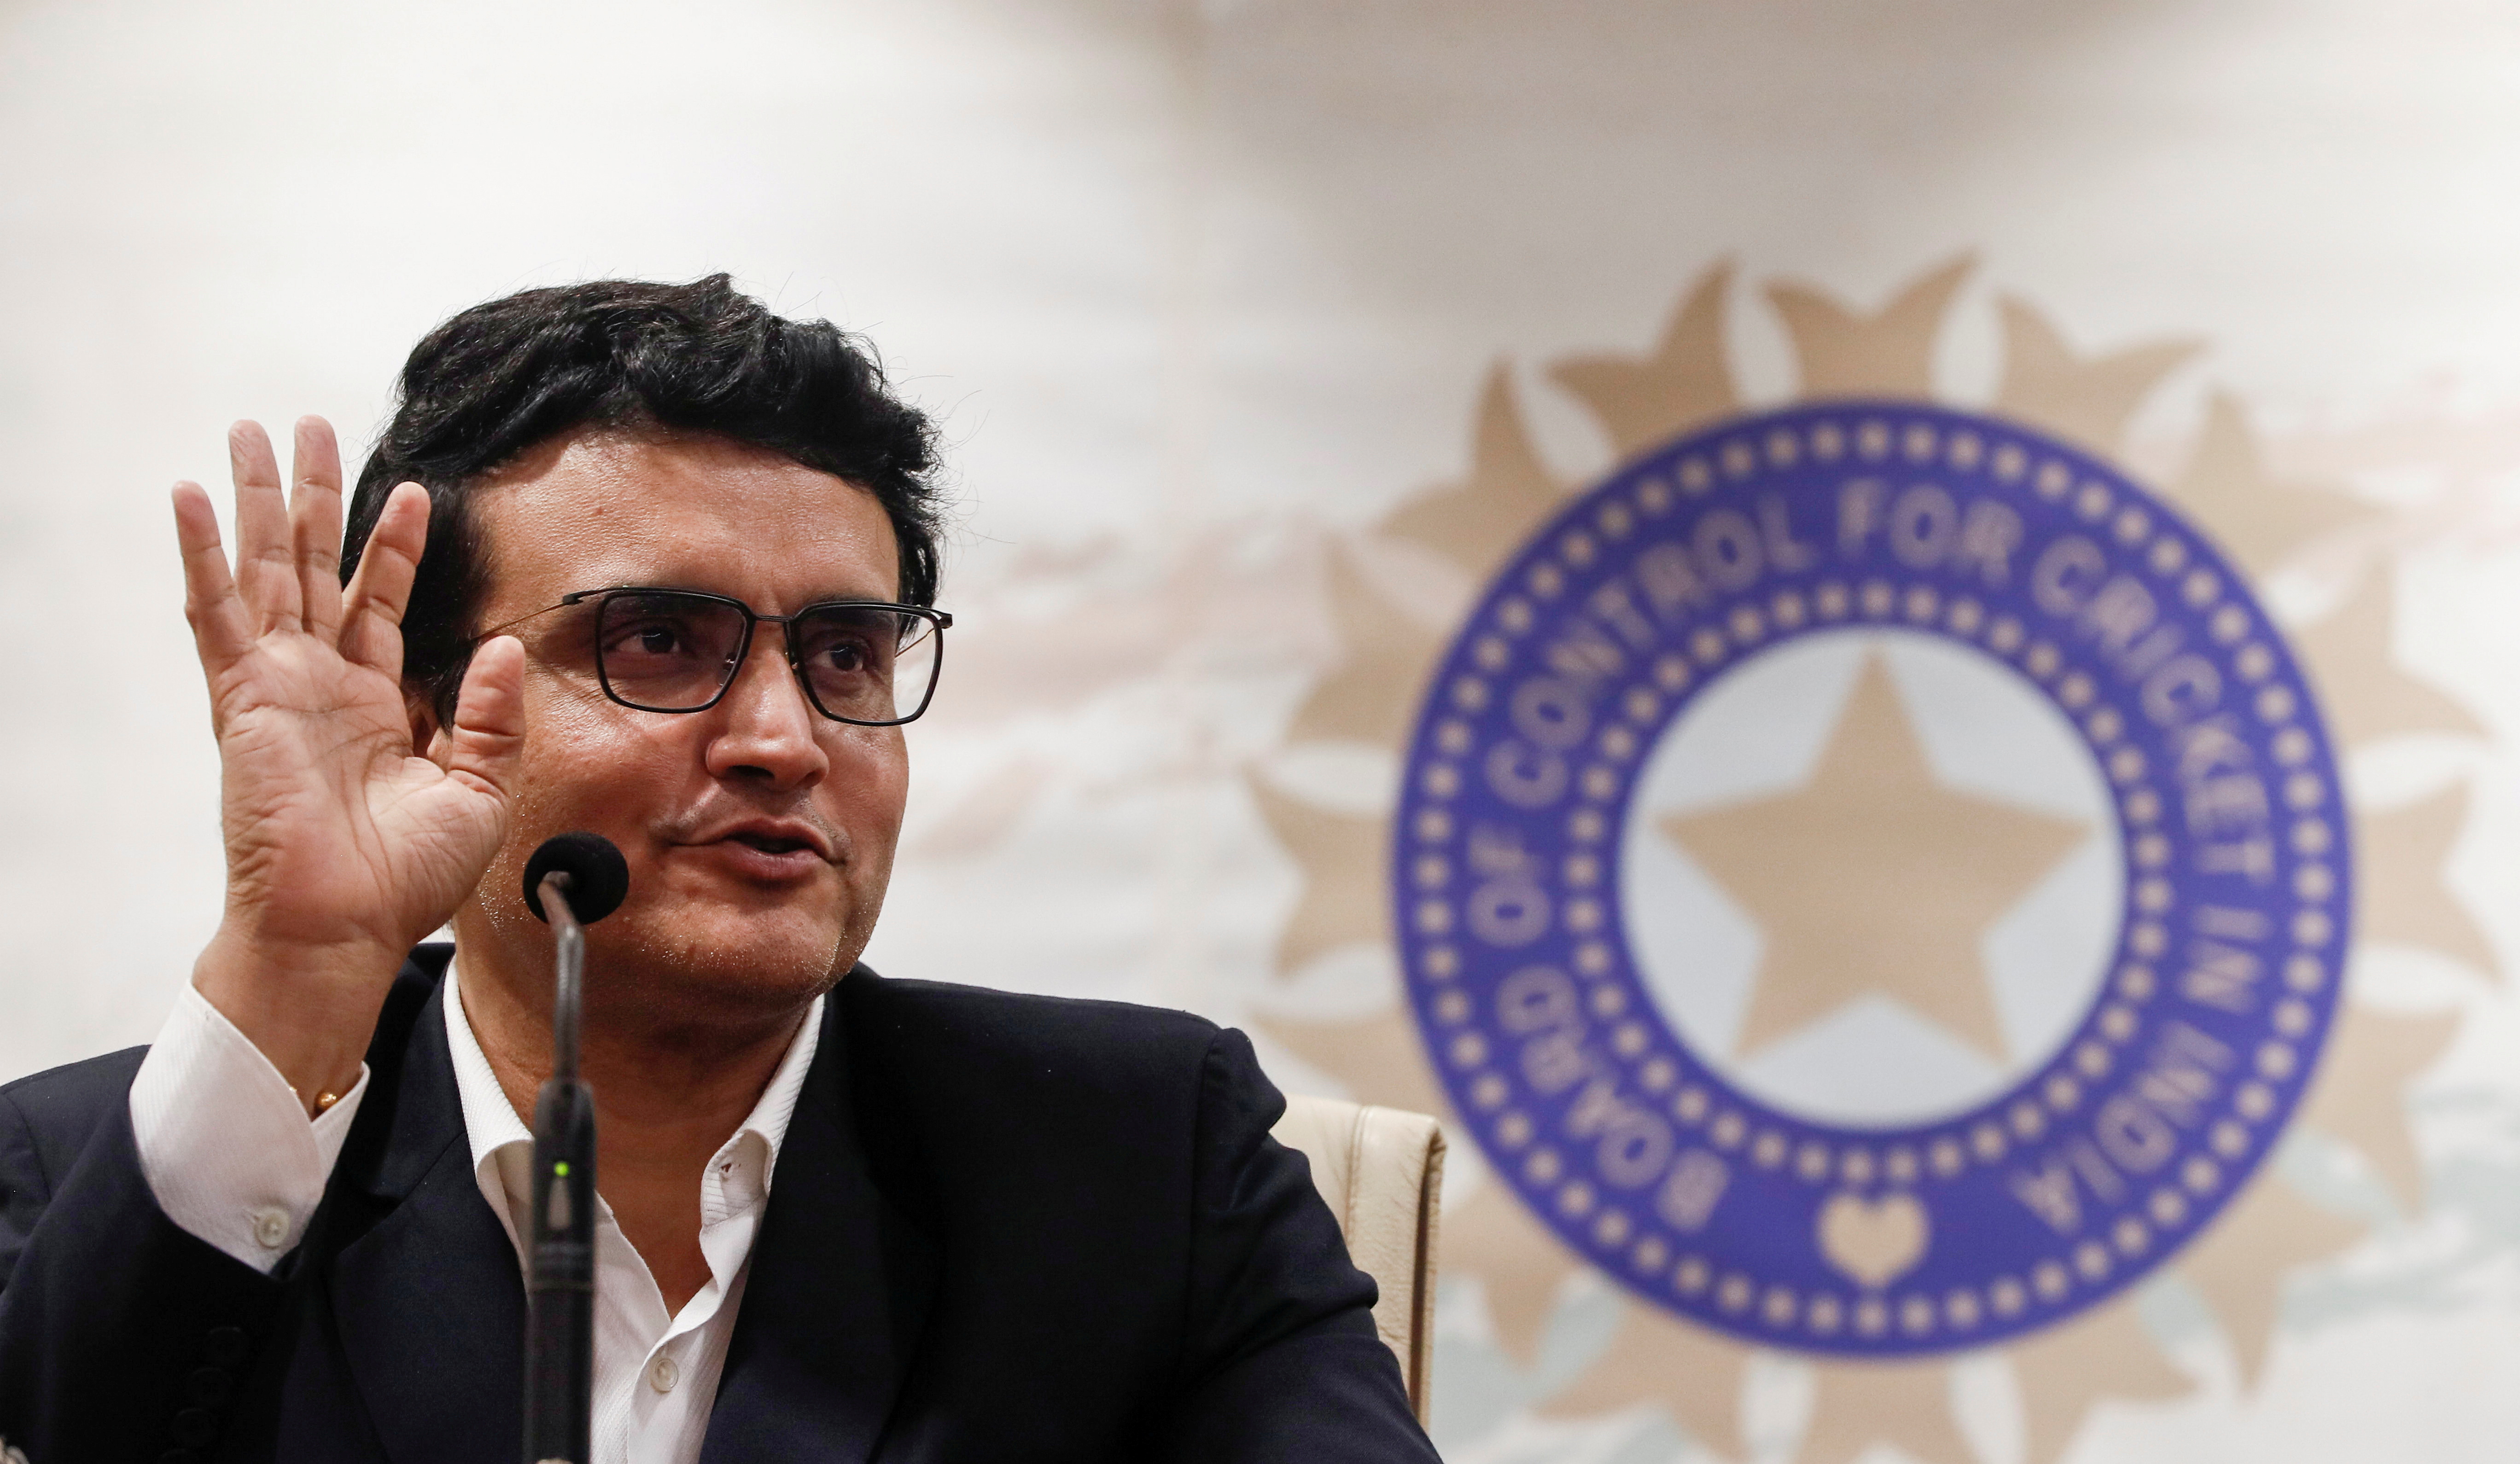 Former Indian cricketer and current BCCI, president Sourav Ganguly reacts during a press conference at the BCCI headquarters in Mumbai